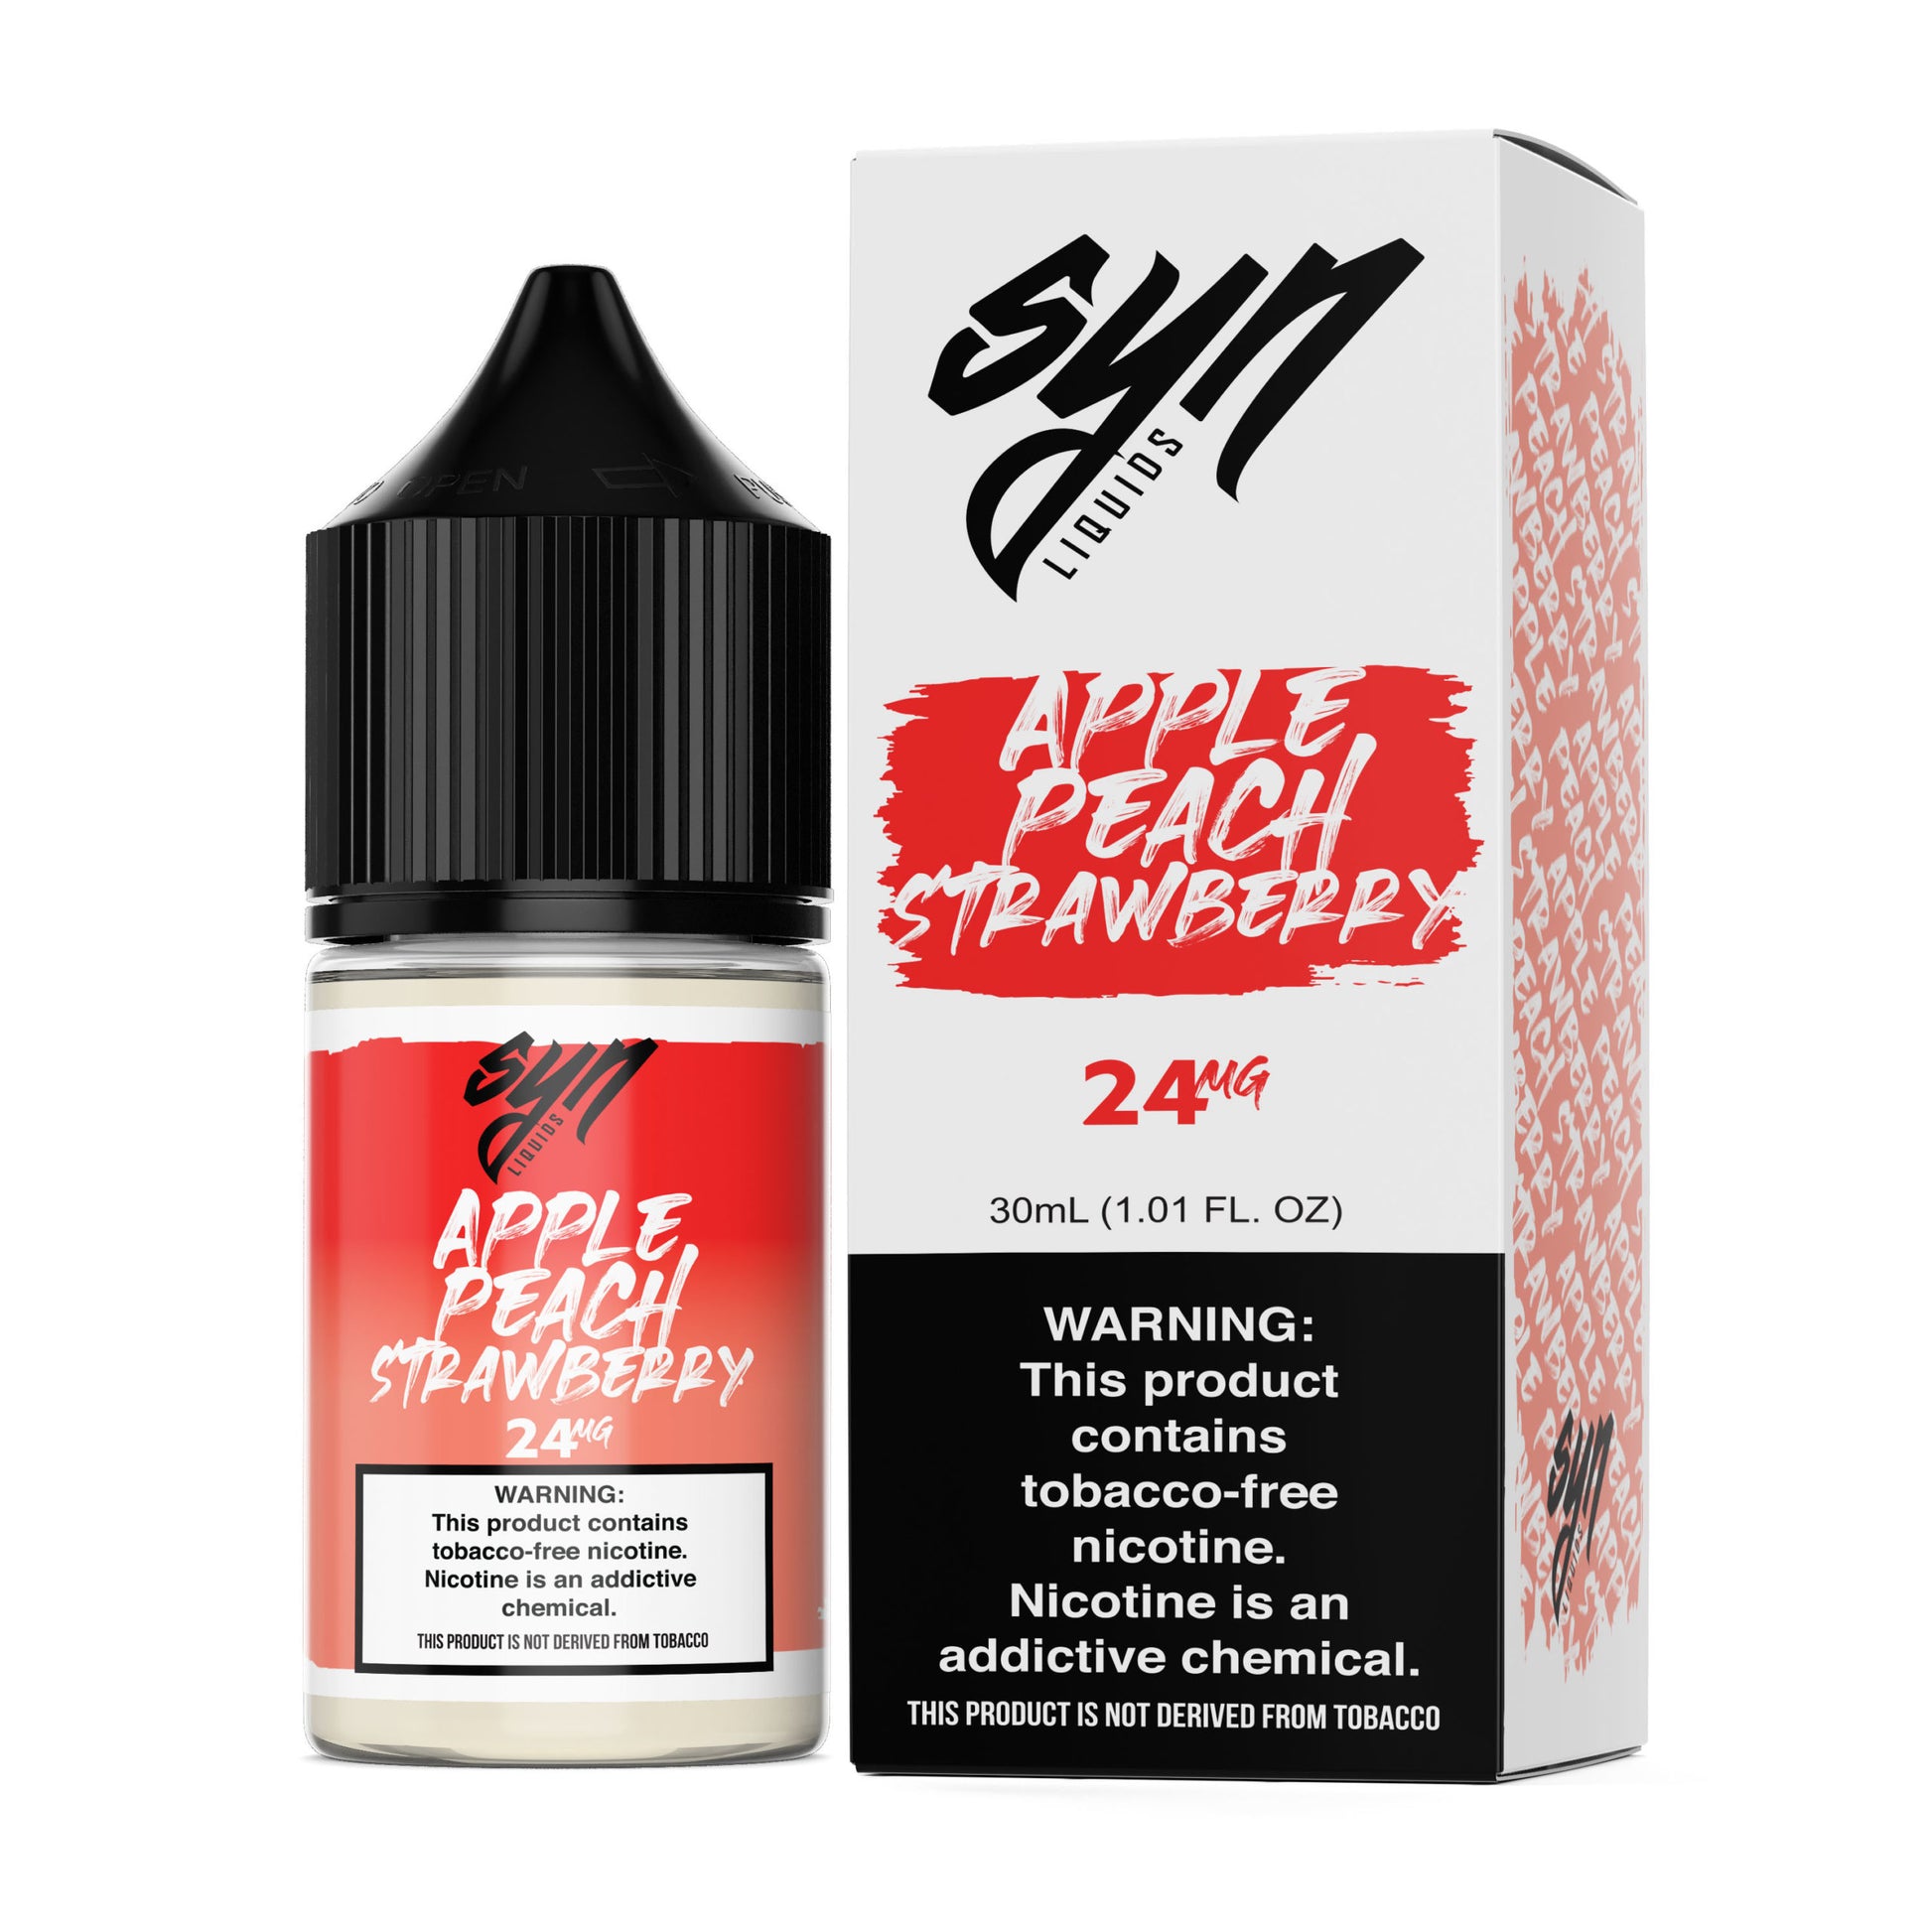 Apple Peach Strawberry TF-Nic by Syn Liquids Salt Series 30mL with Packaging